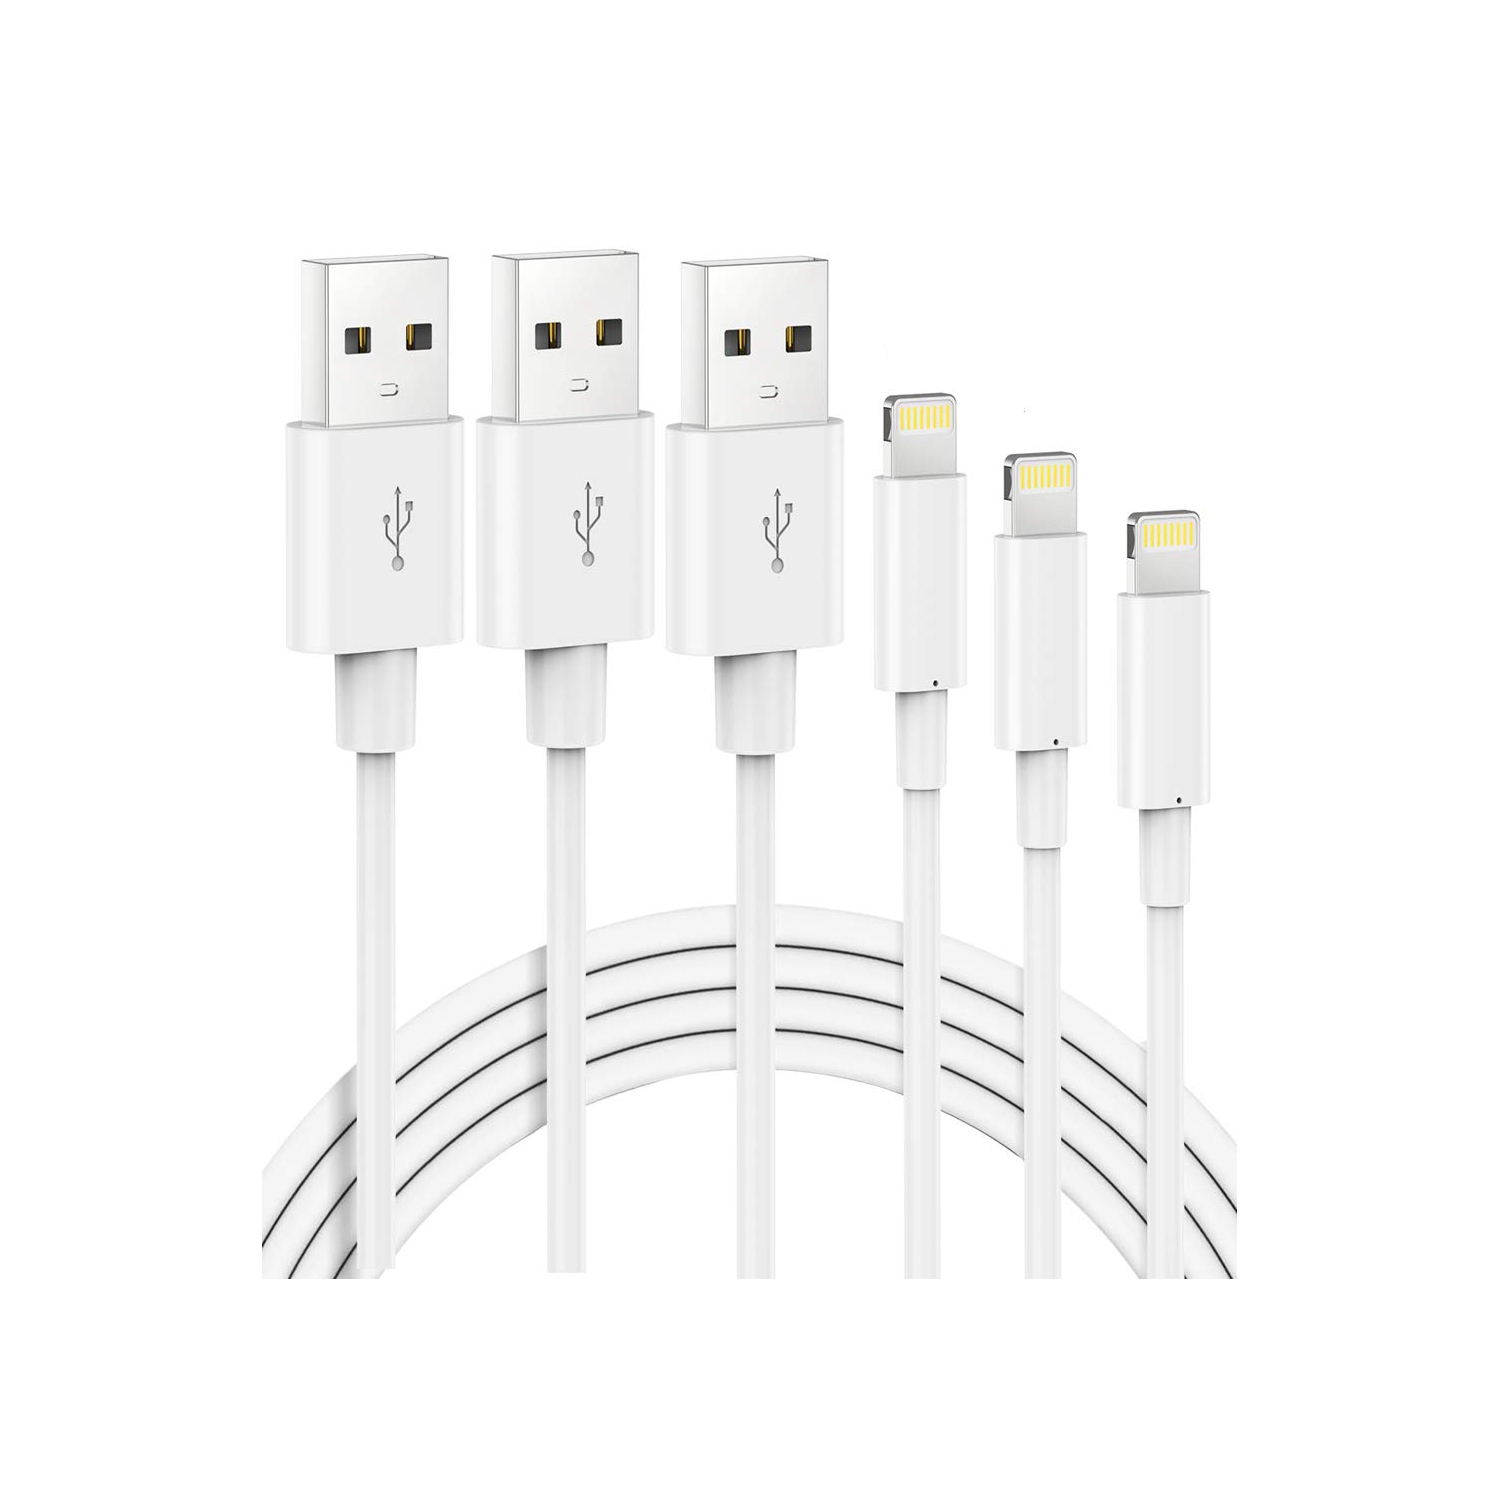 (3 PACK) - [Apple MFi Certified] iPhone/iPad Charging/Charger Cord Lightening to USB Cable Fast Charging and Syncing for iPads,iPods and iPhone 11/X/8/7/6s/6/plus/5s/5c/SE - WINGOMART